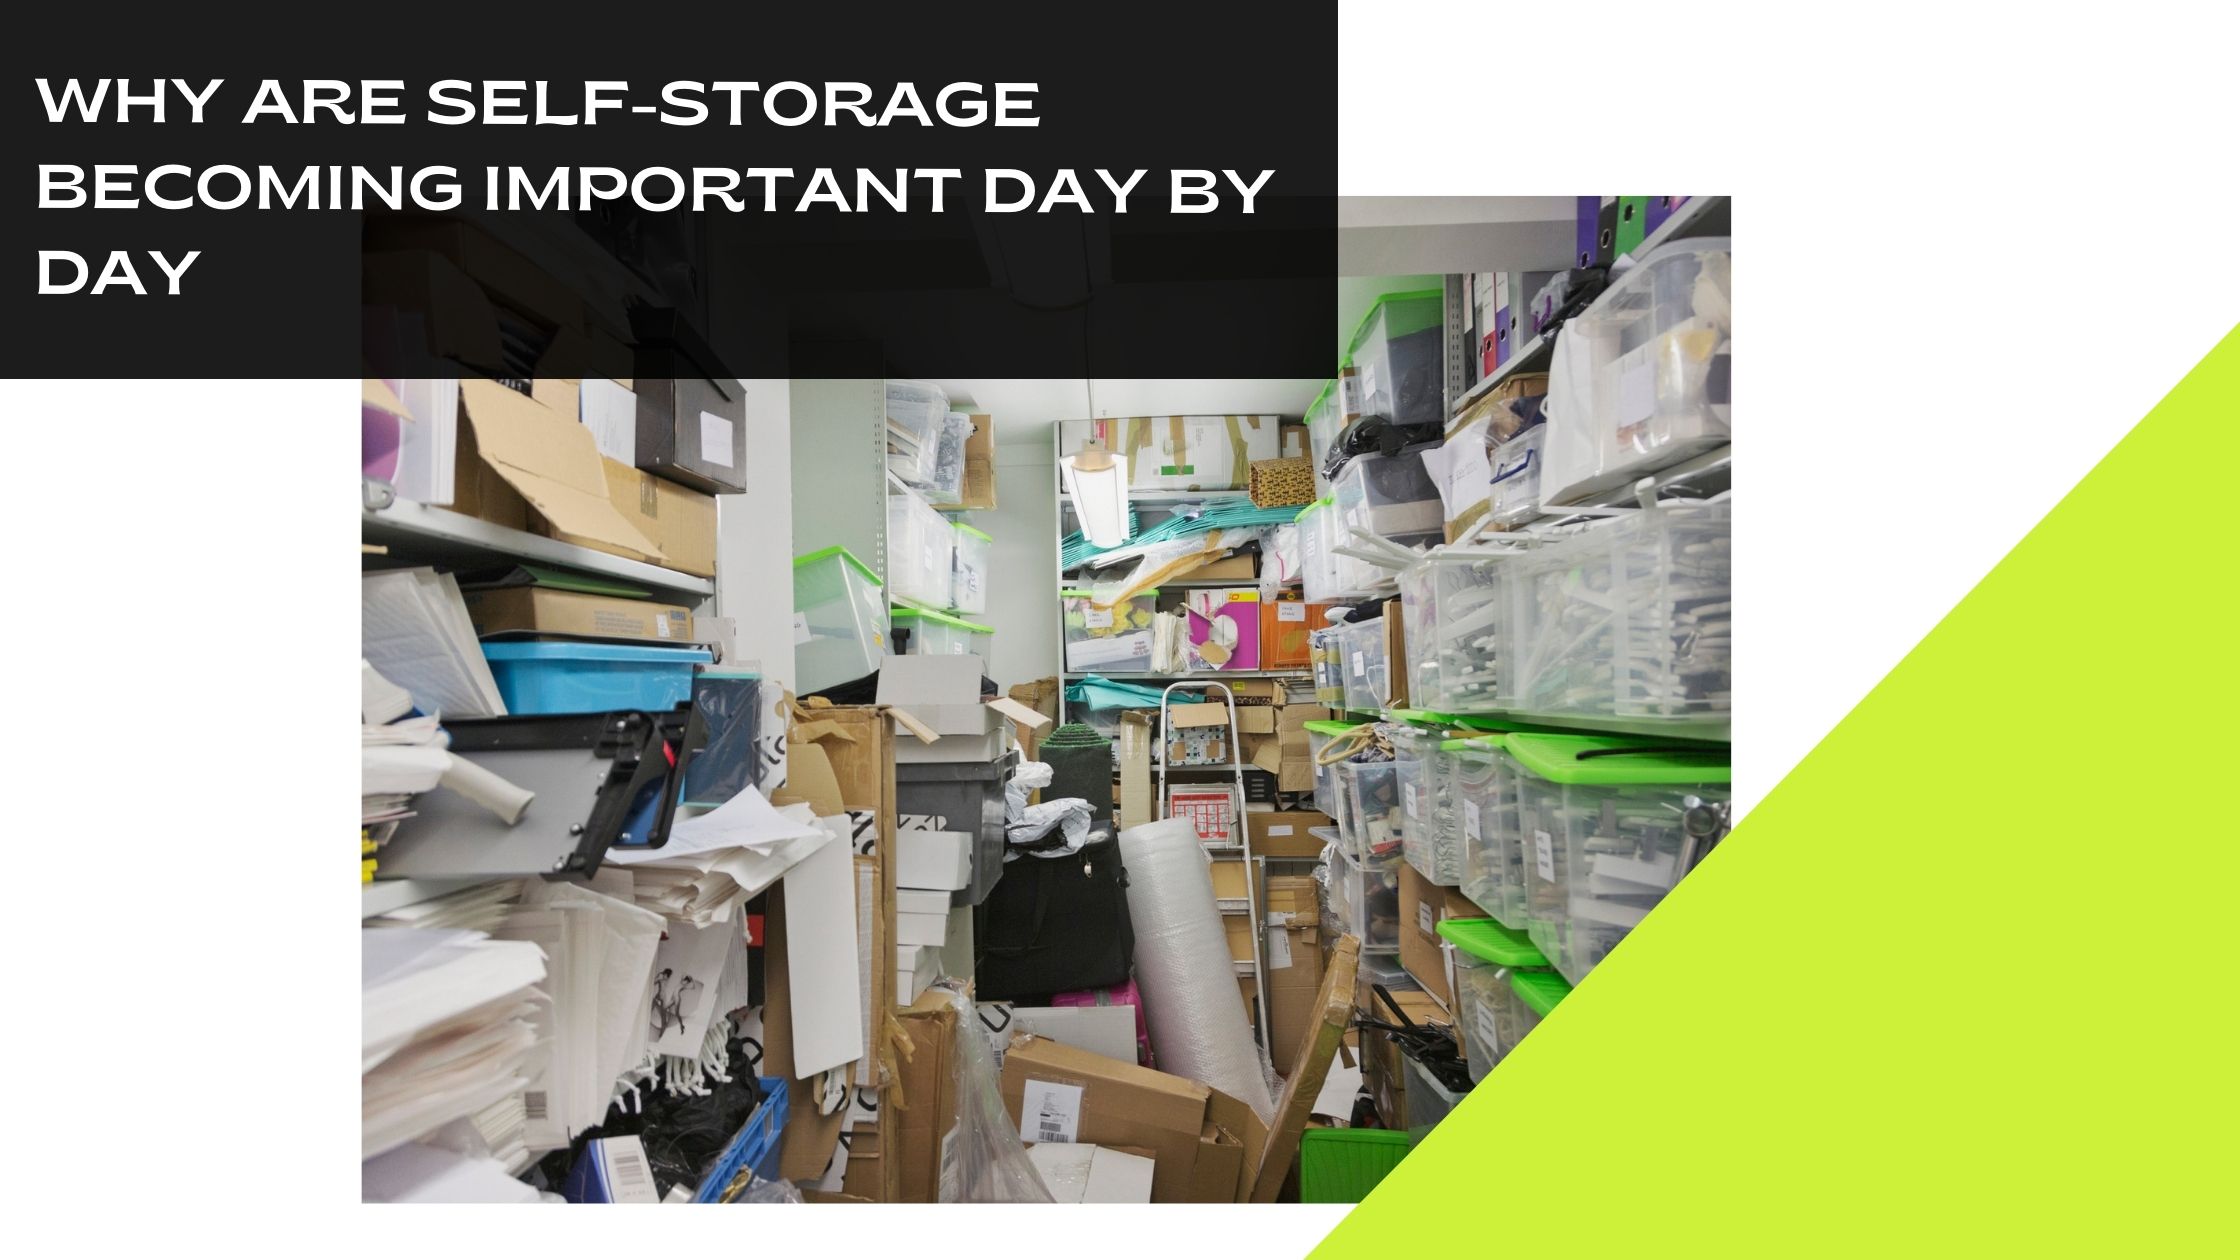 Why Are Self-Storage Spaces Becoming Important Day by Day